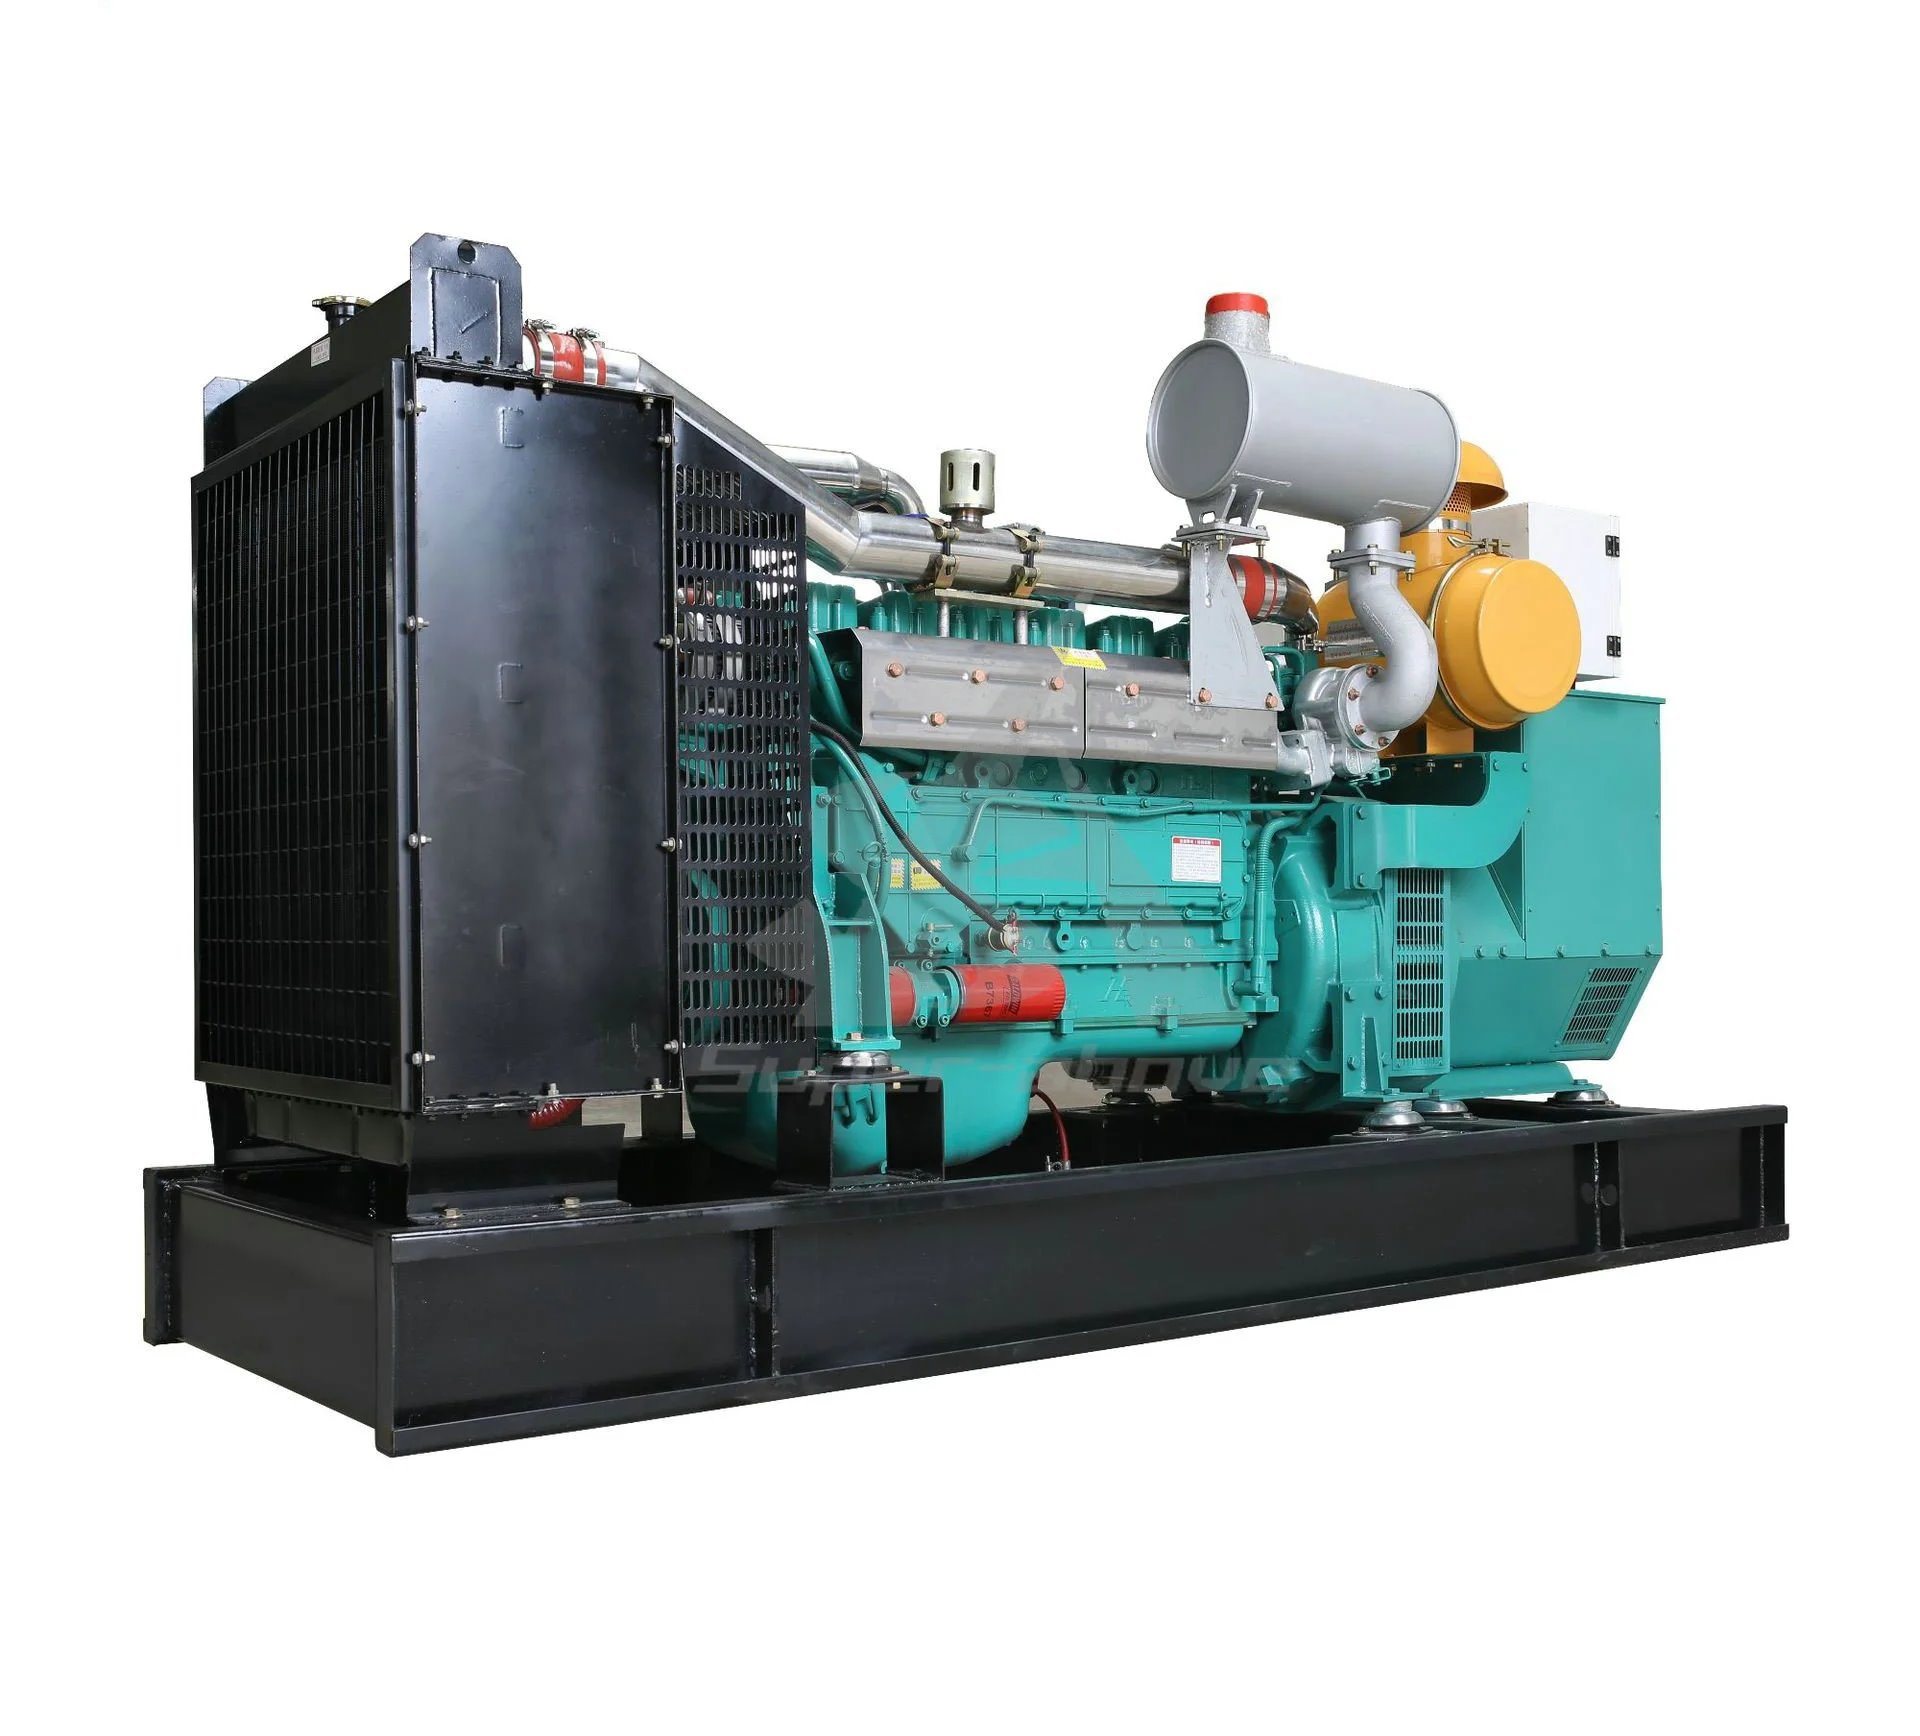 Factory Standby Power 100kw/125kVA Genset with Volvo Power for Sale